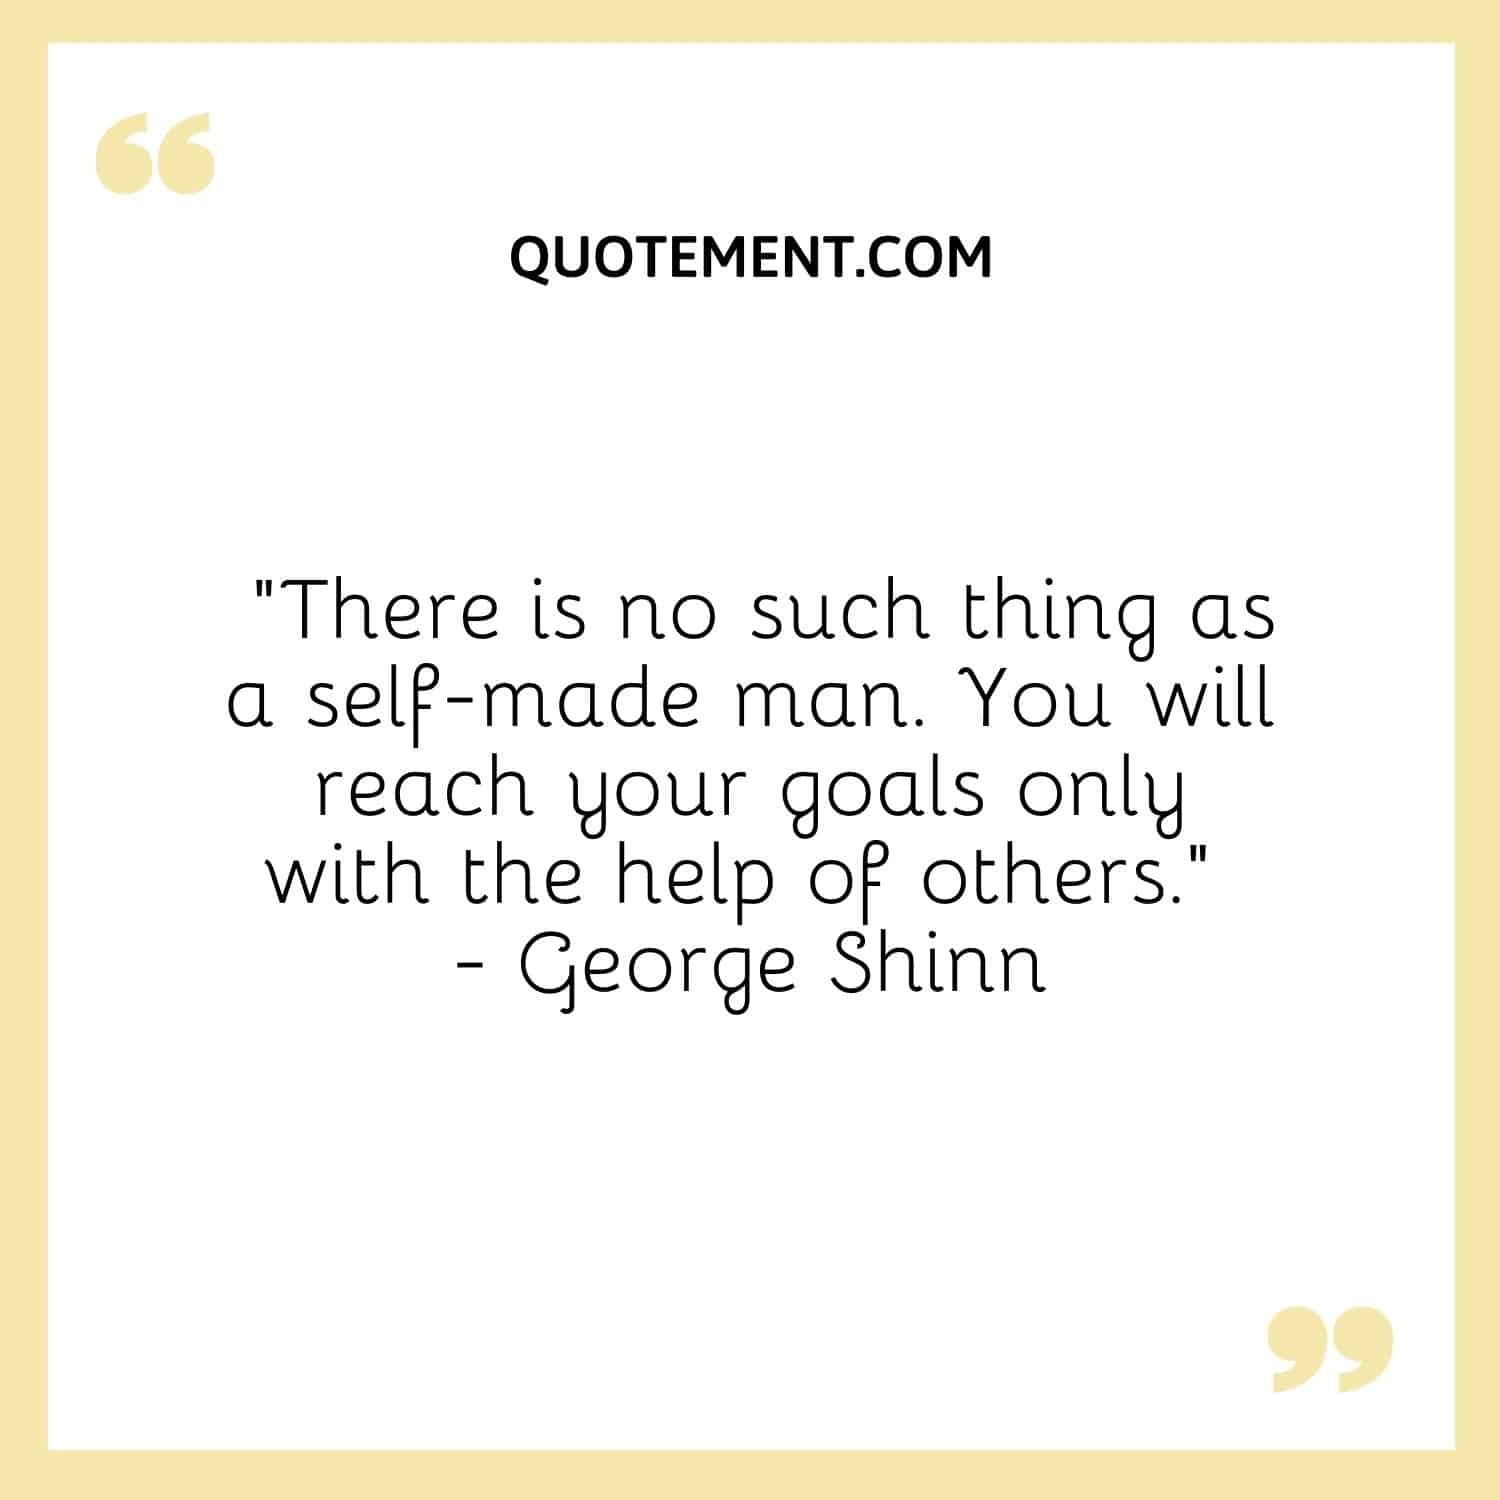 There is no such thing as a self-made man. You will reach your goals only with the help of others. — George Shinn 